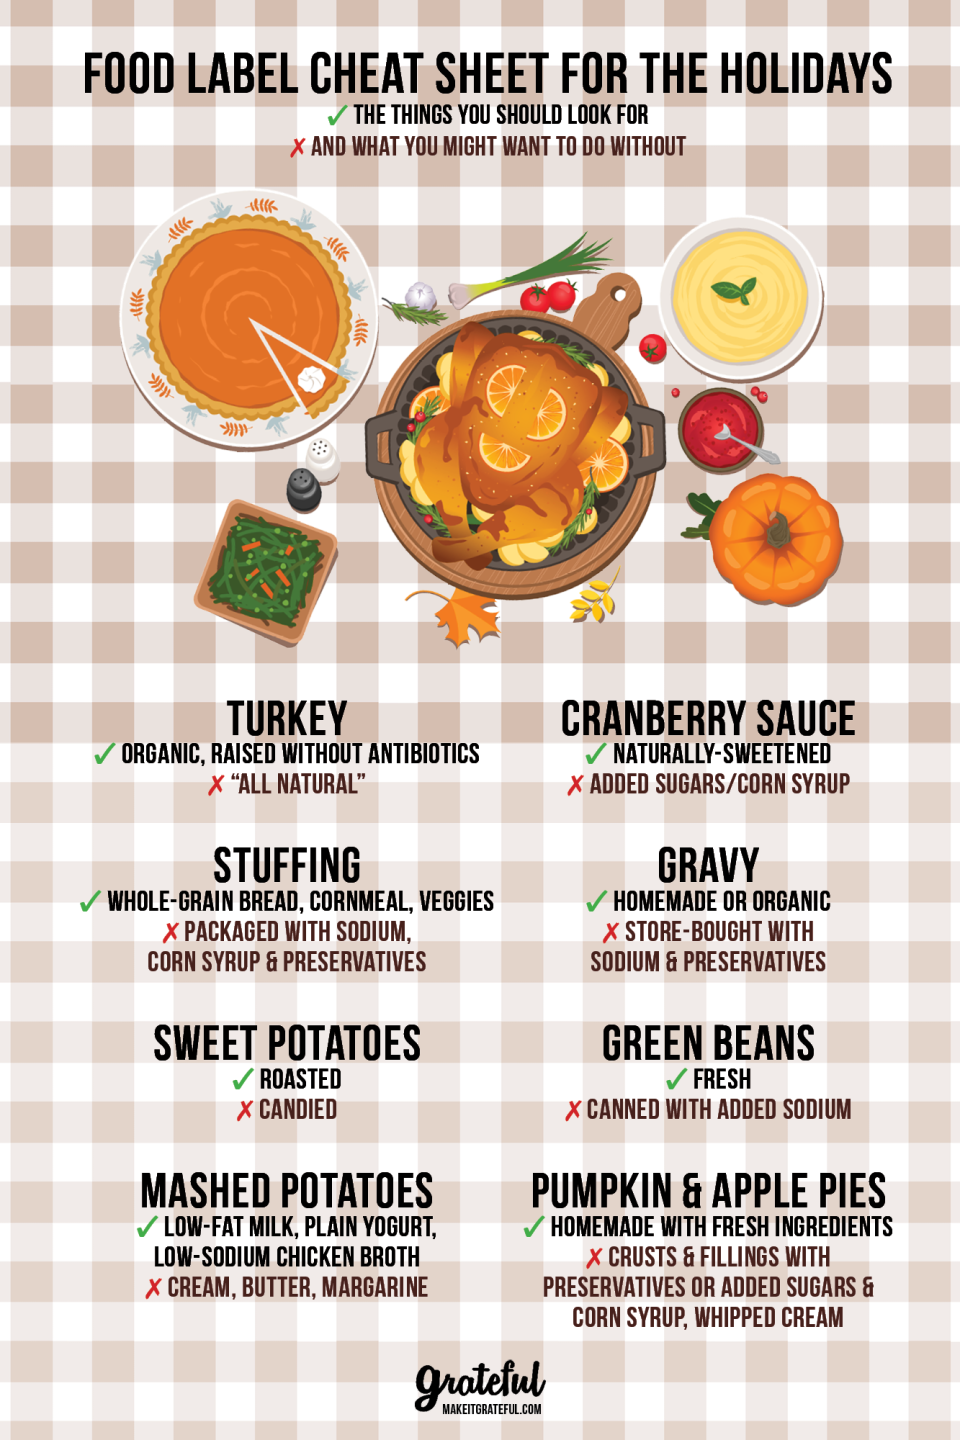 Holiday food label cheat sheet infographic